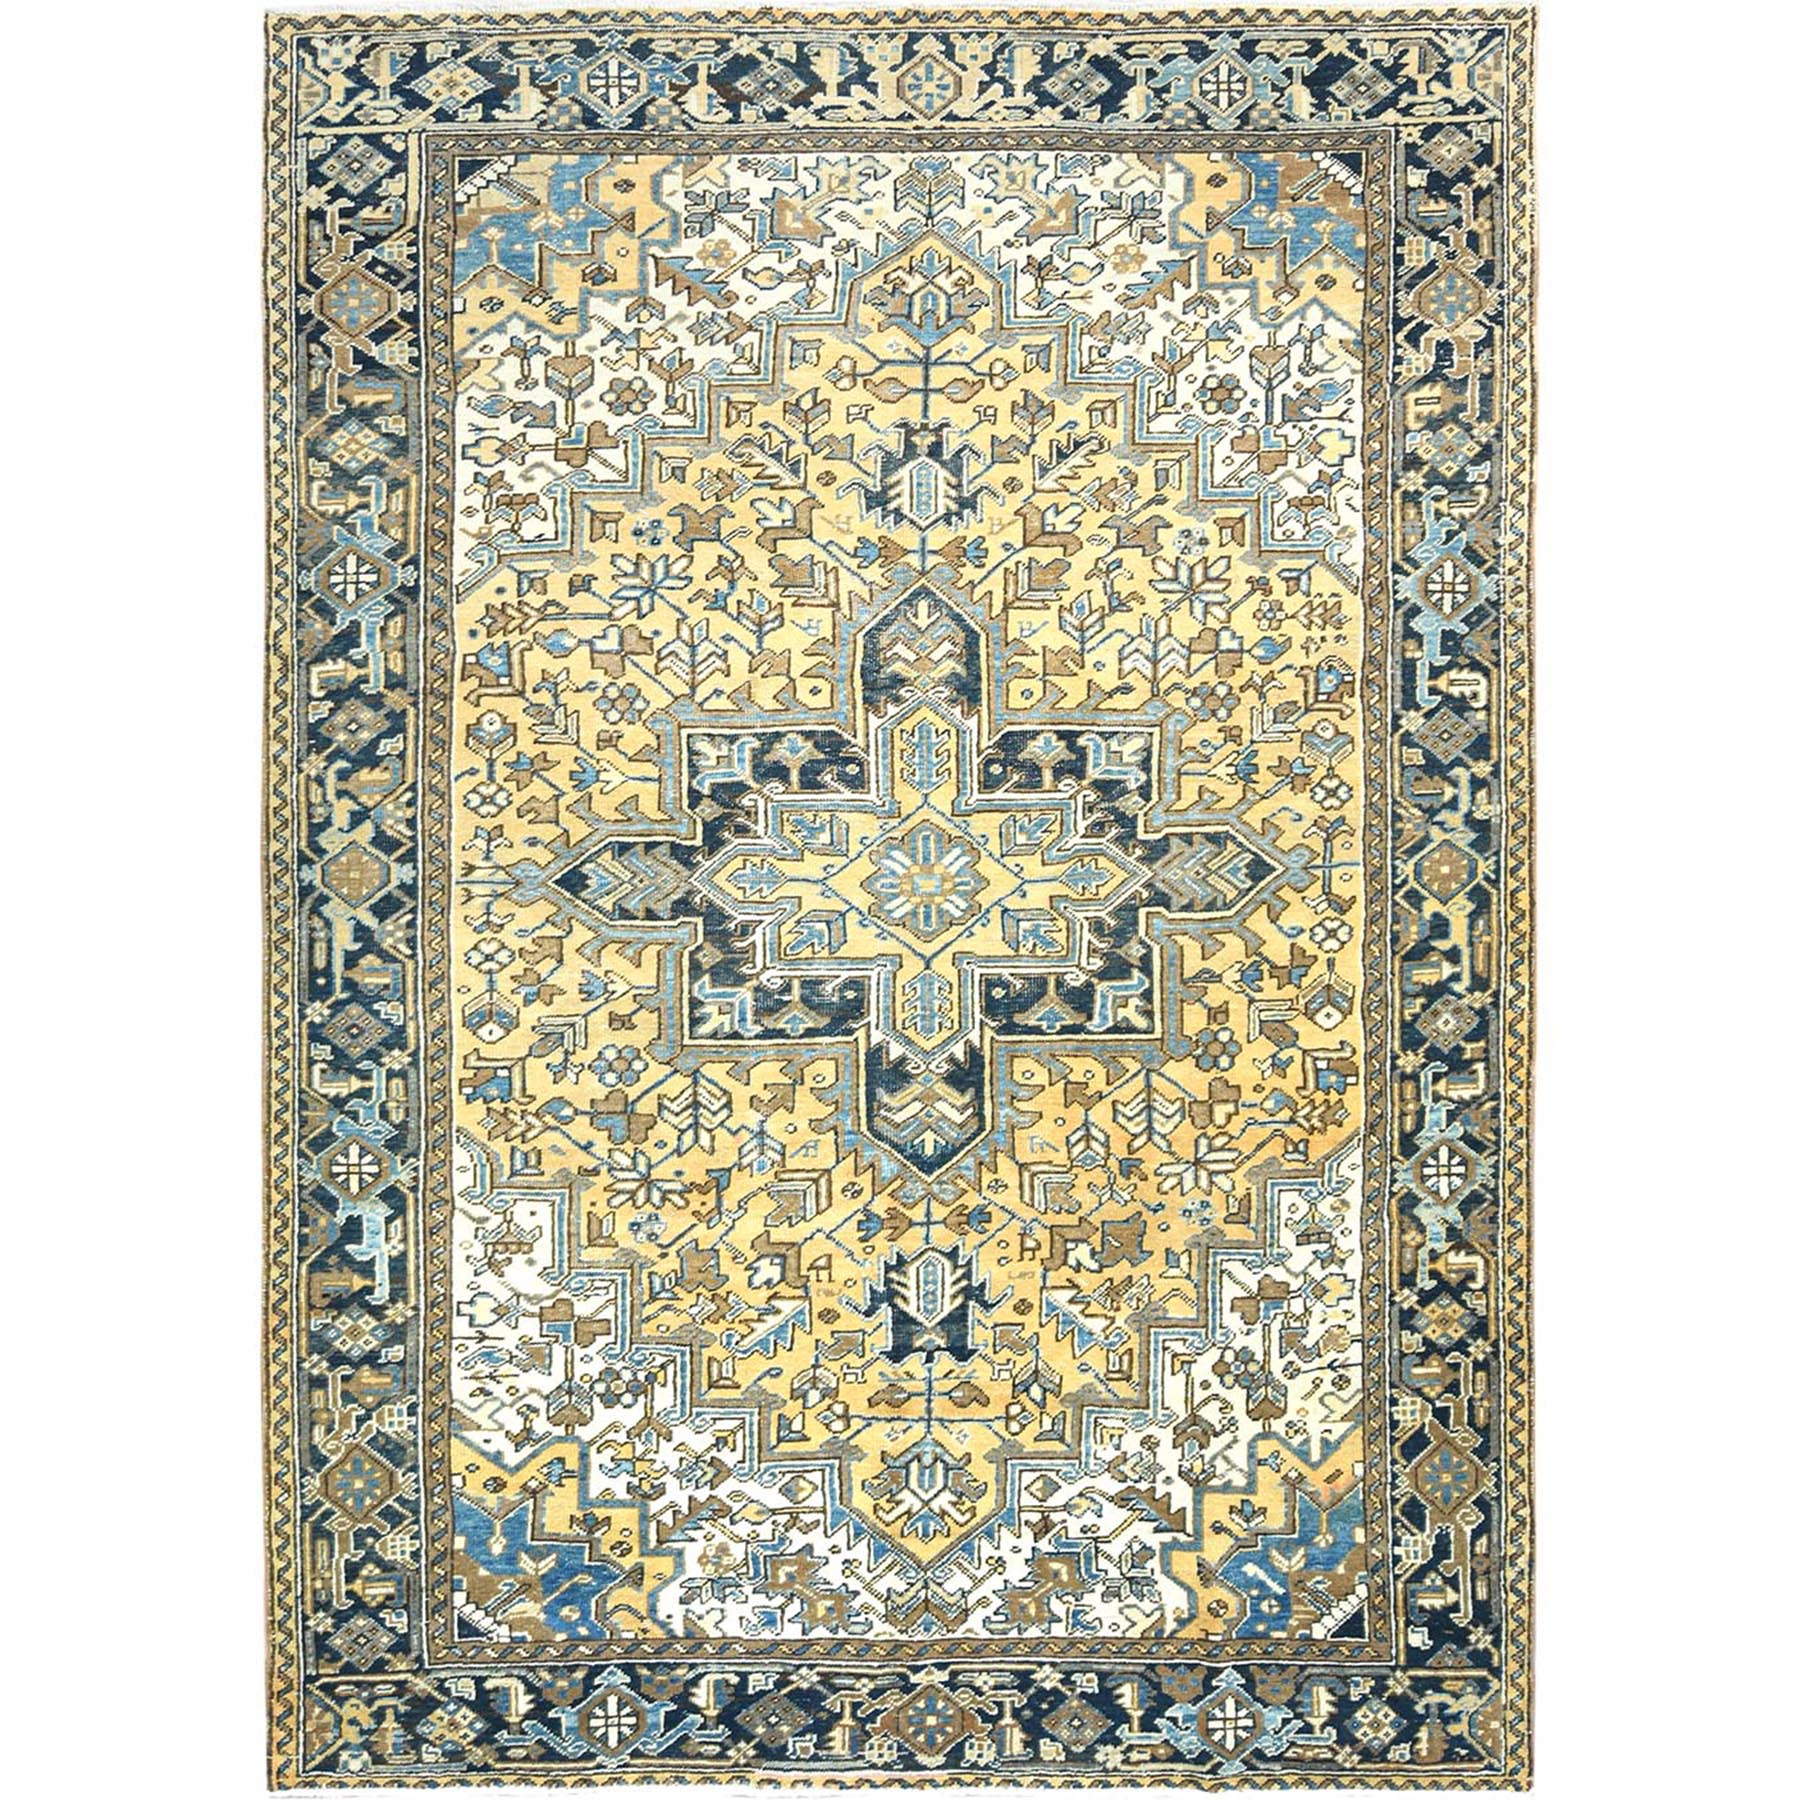  Wool Hand-Knotted Area Rug 7'8